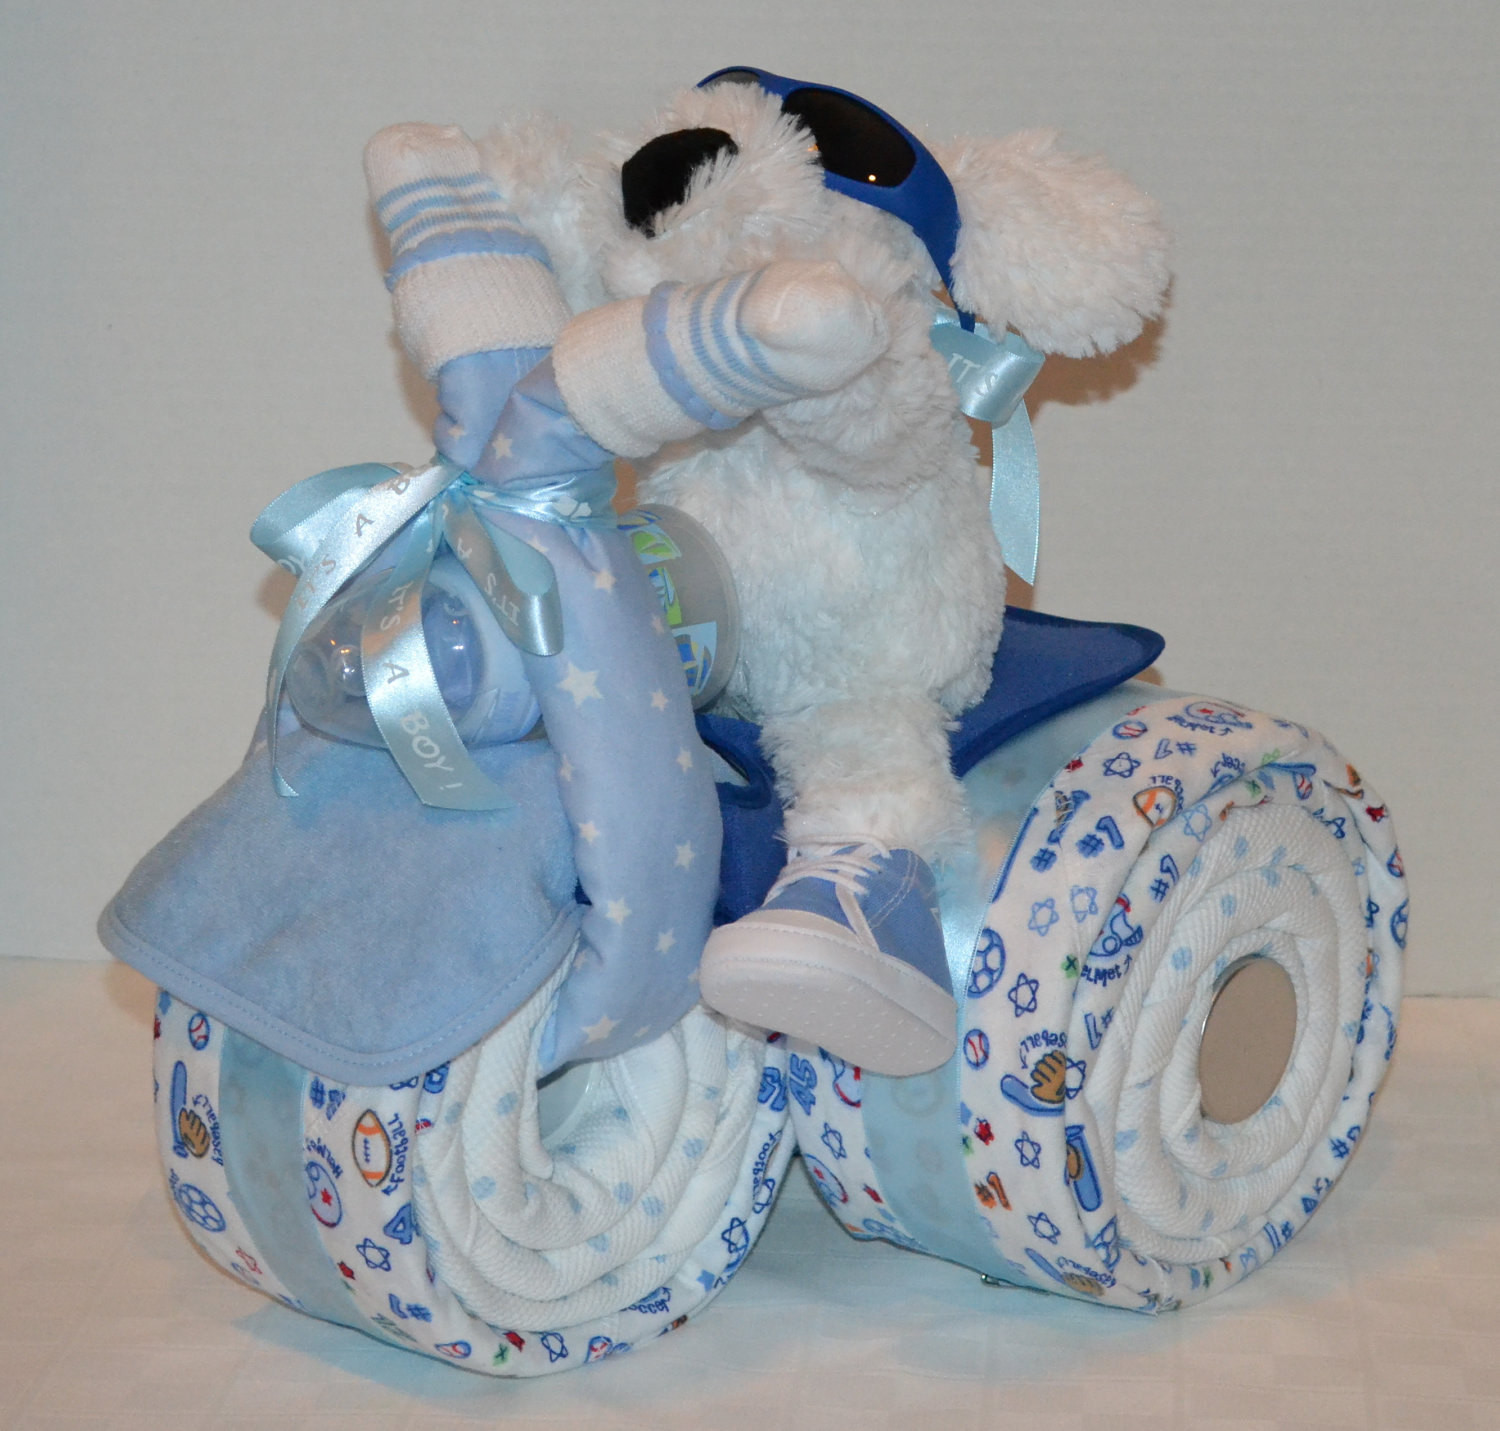 Cute Baby Shower Gift Ideas For Boys
 Tricycle Trike Diaper Cake Baby Shower Gift Sports theme